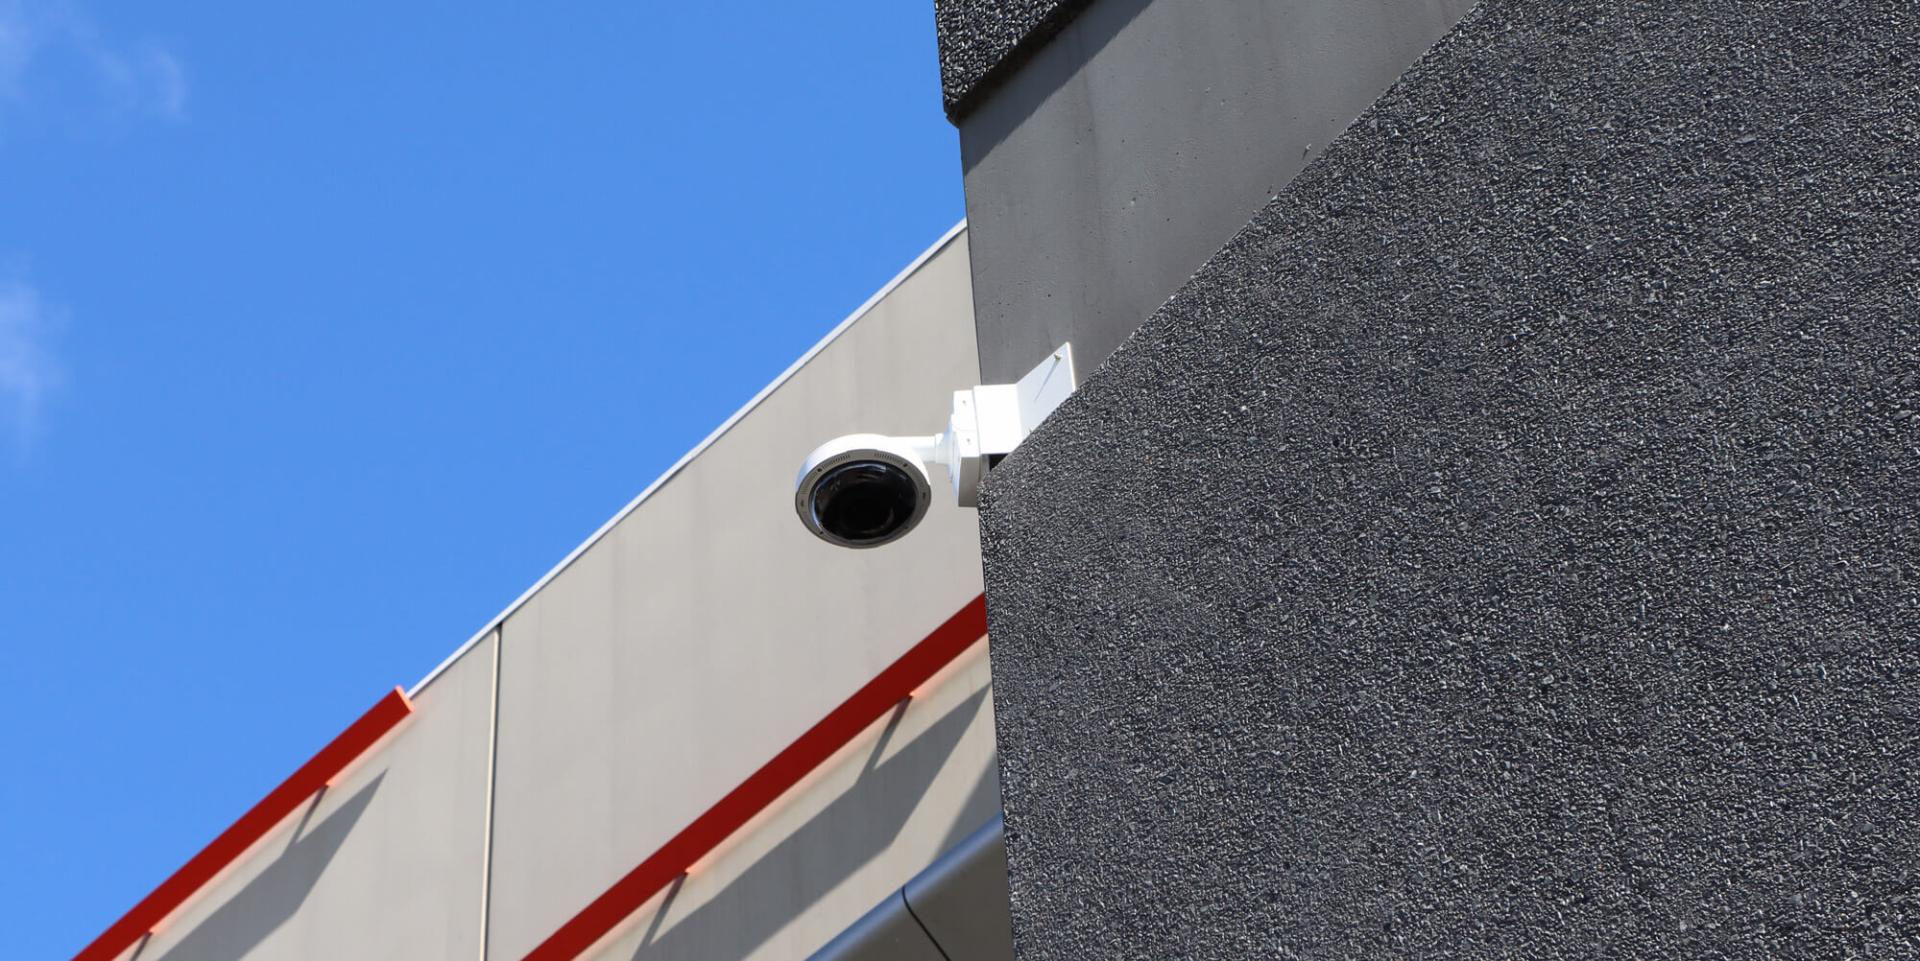 Advanced Security CCTV Camera on building wall